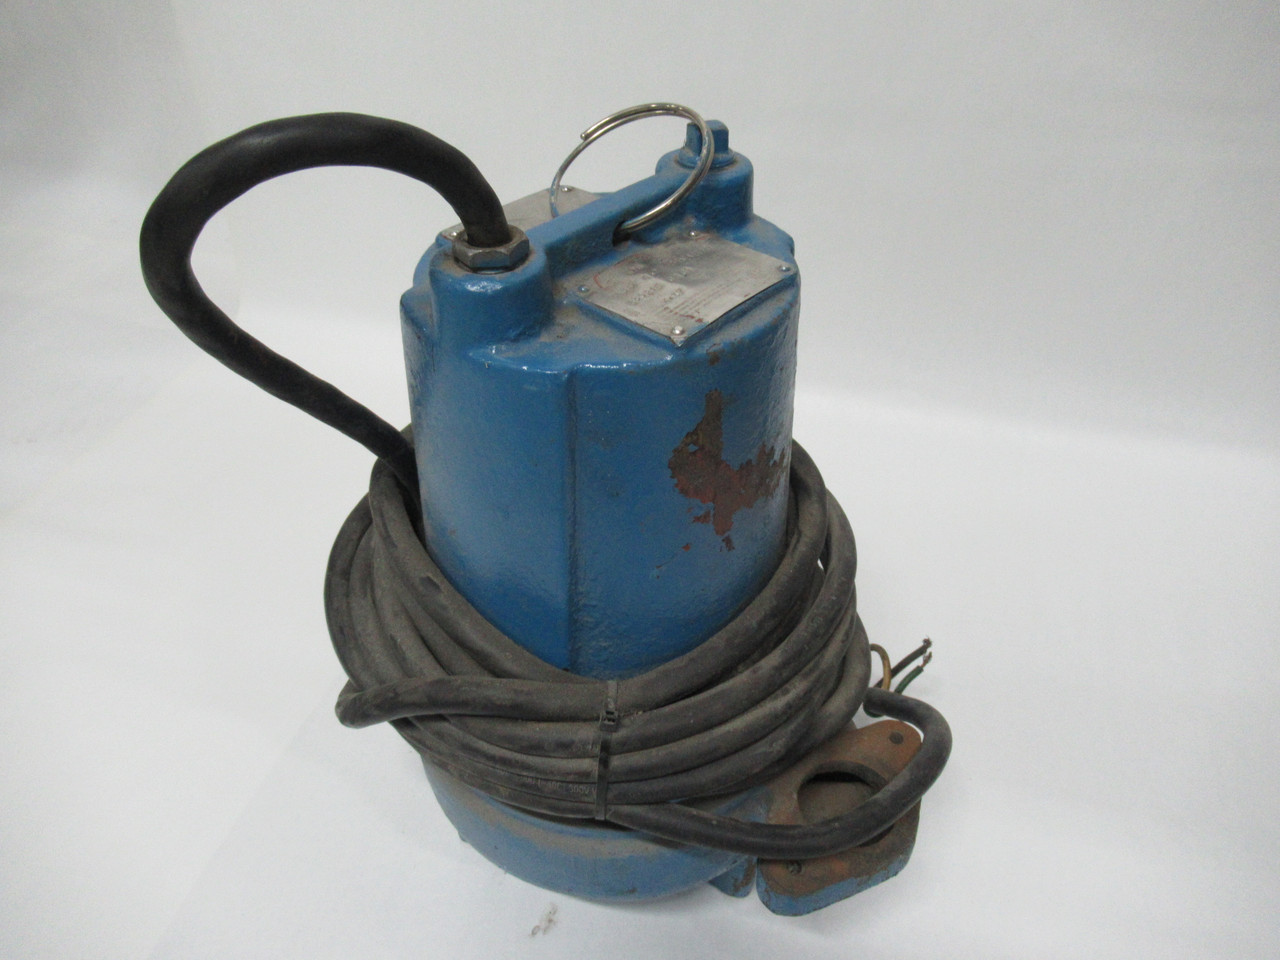 Barnes Submersible Sewage Ejector Pump 2" Ports Steel 1.5HP 575V USED